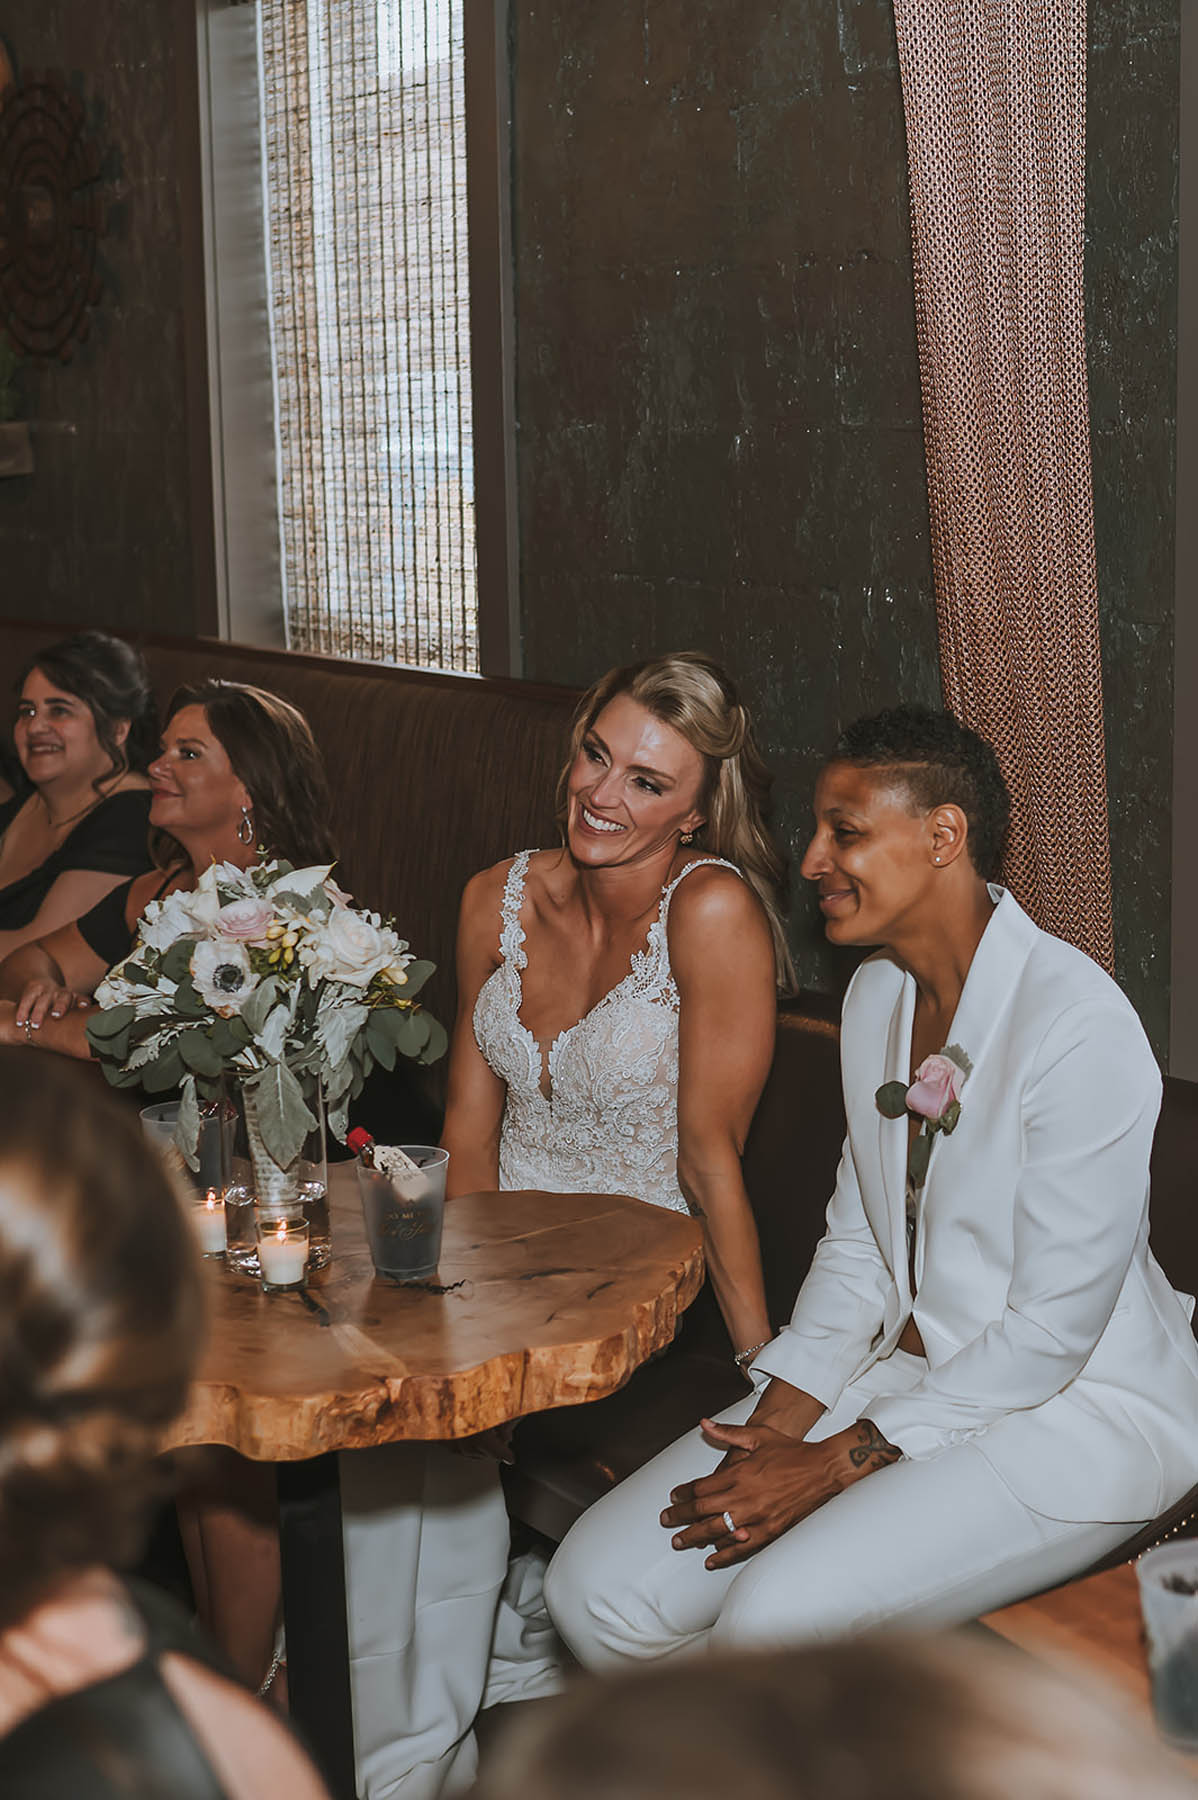 The newlyweds sit ad a small bistro table and smile as they listen to a speech.